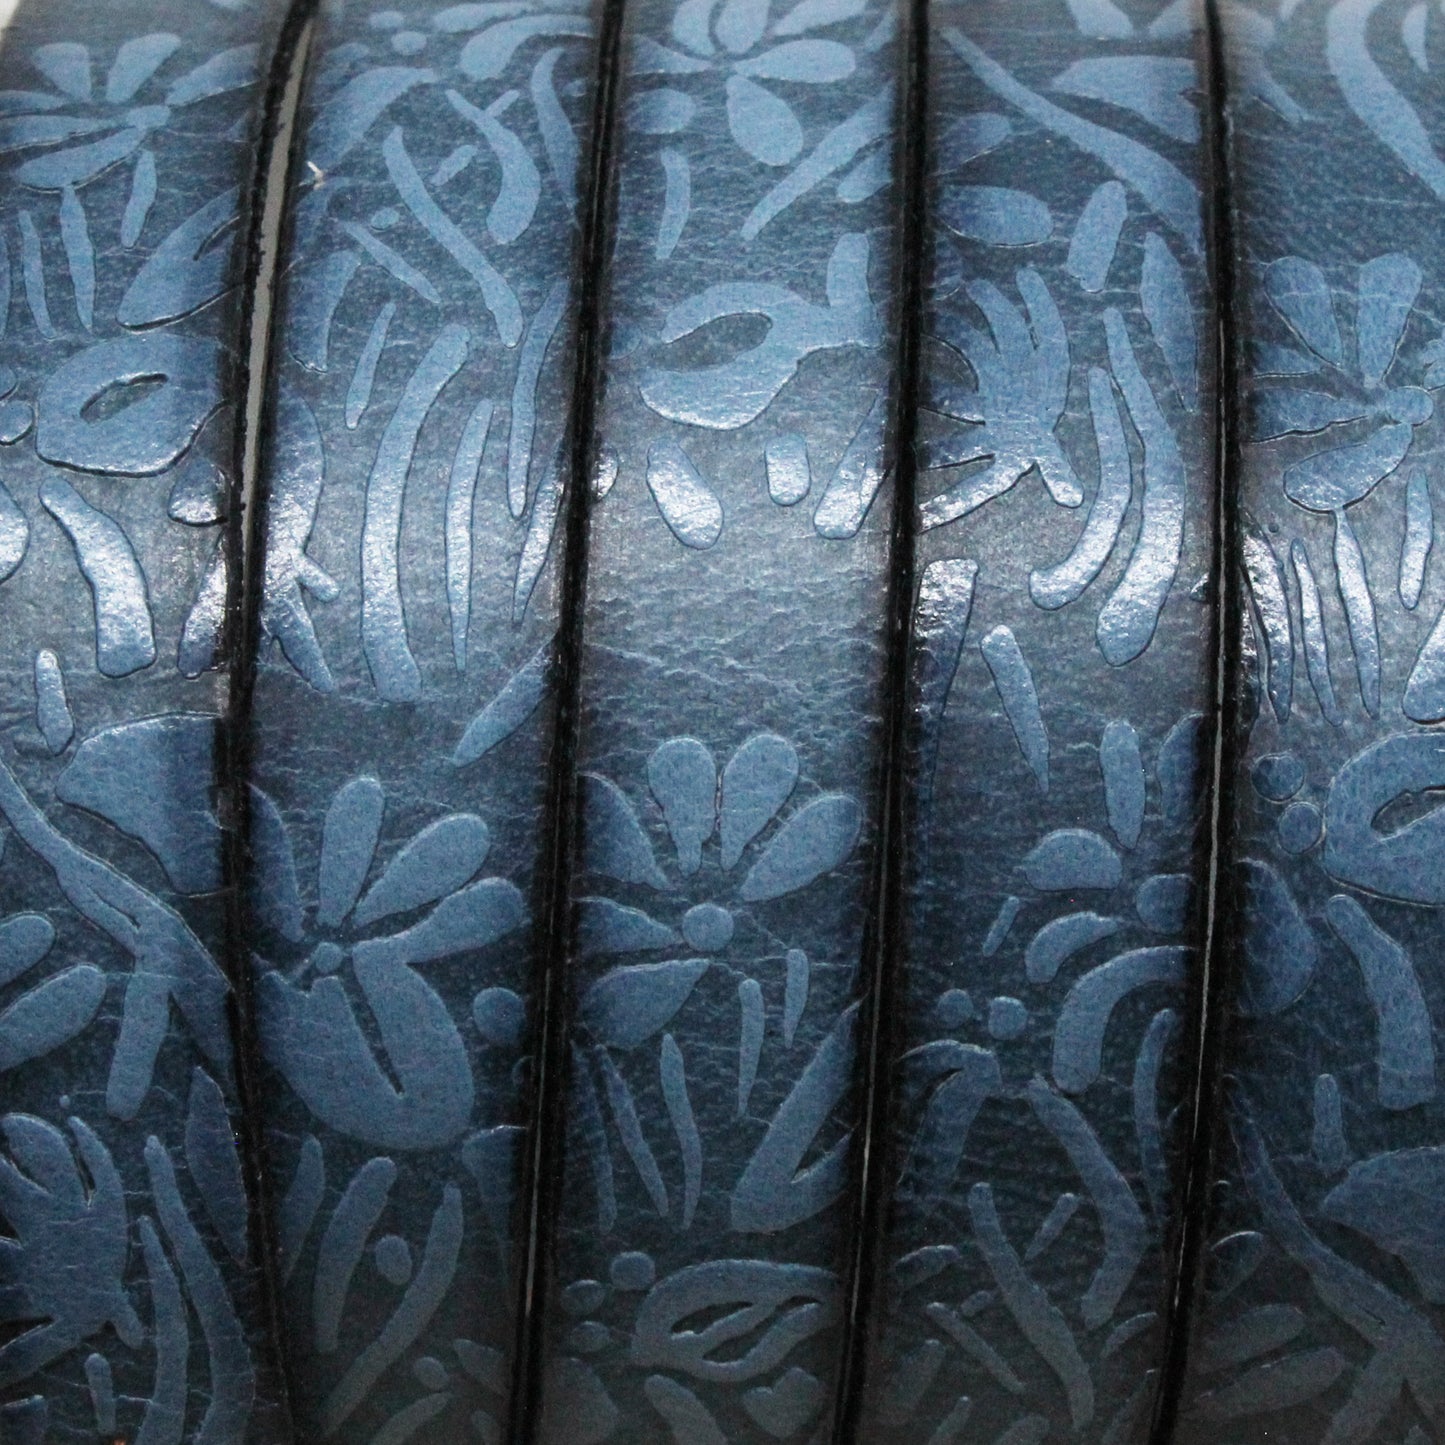 BLUE Embossed Floral 10mm Flat Leather Strap / sold by the foot / 10 mm wide x 2 mm thick